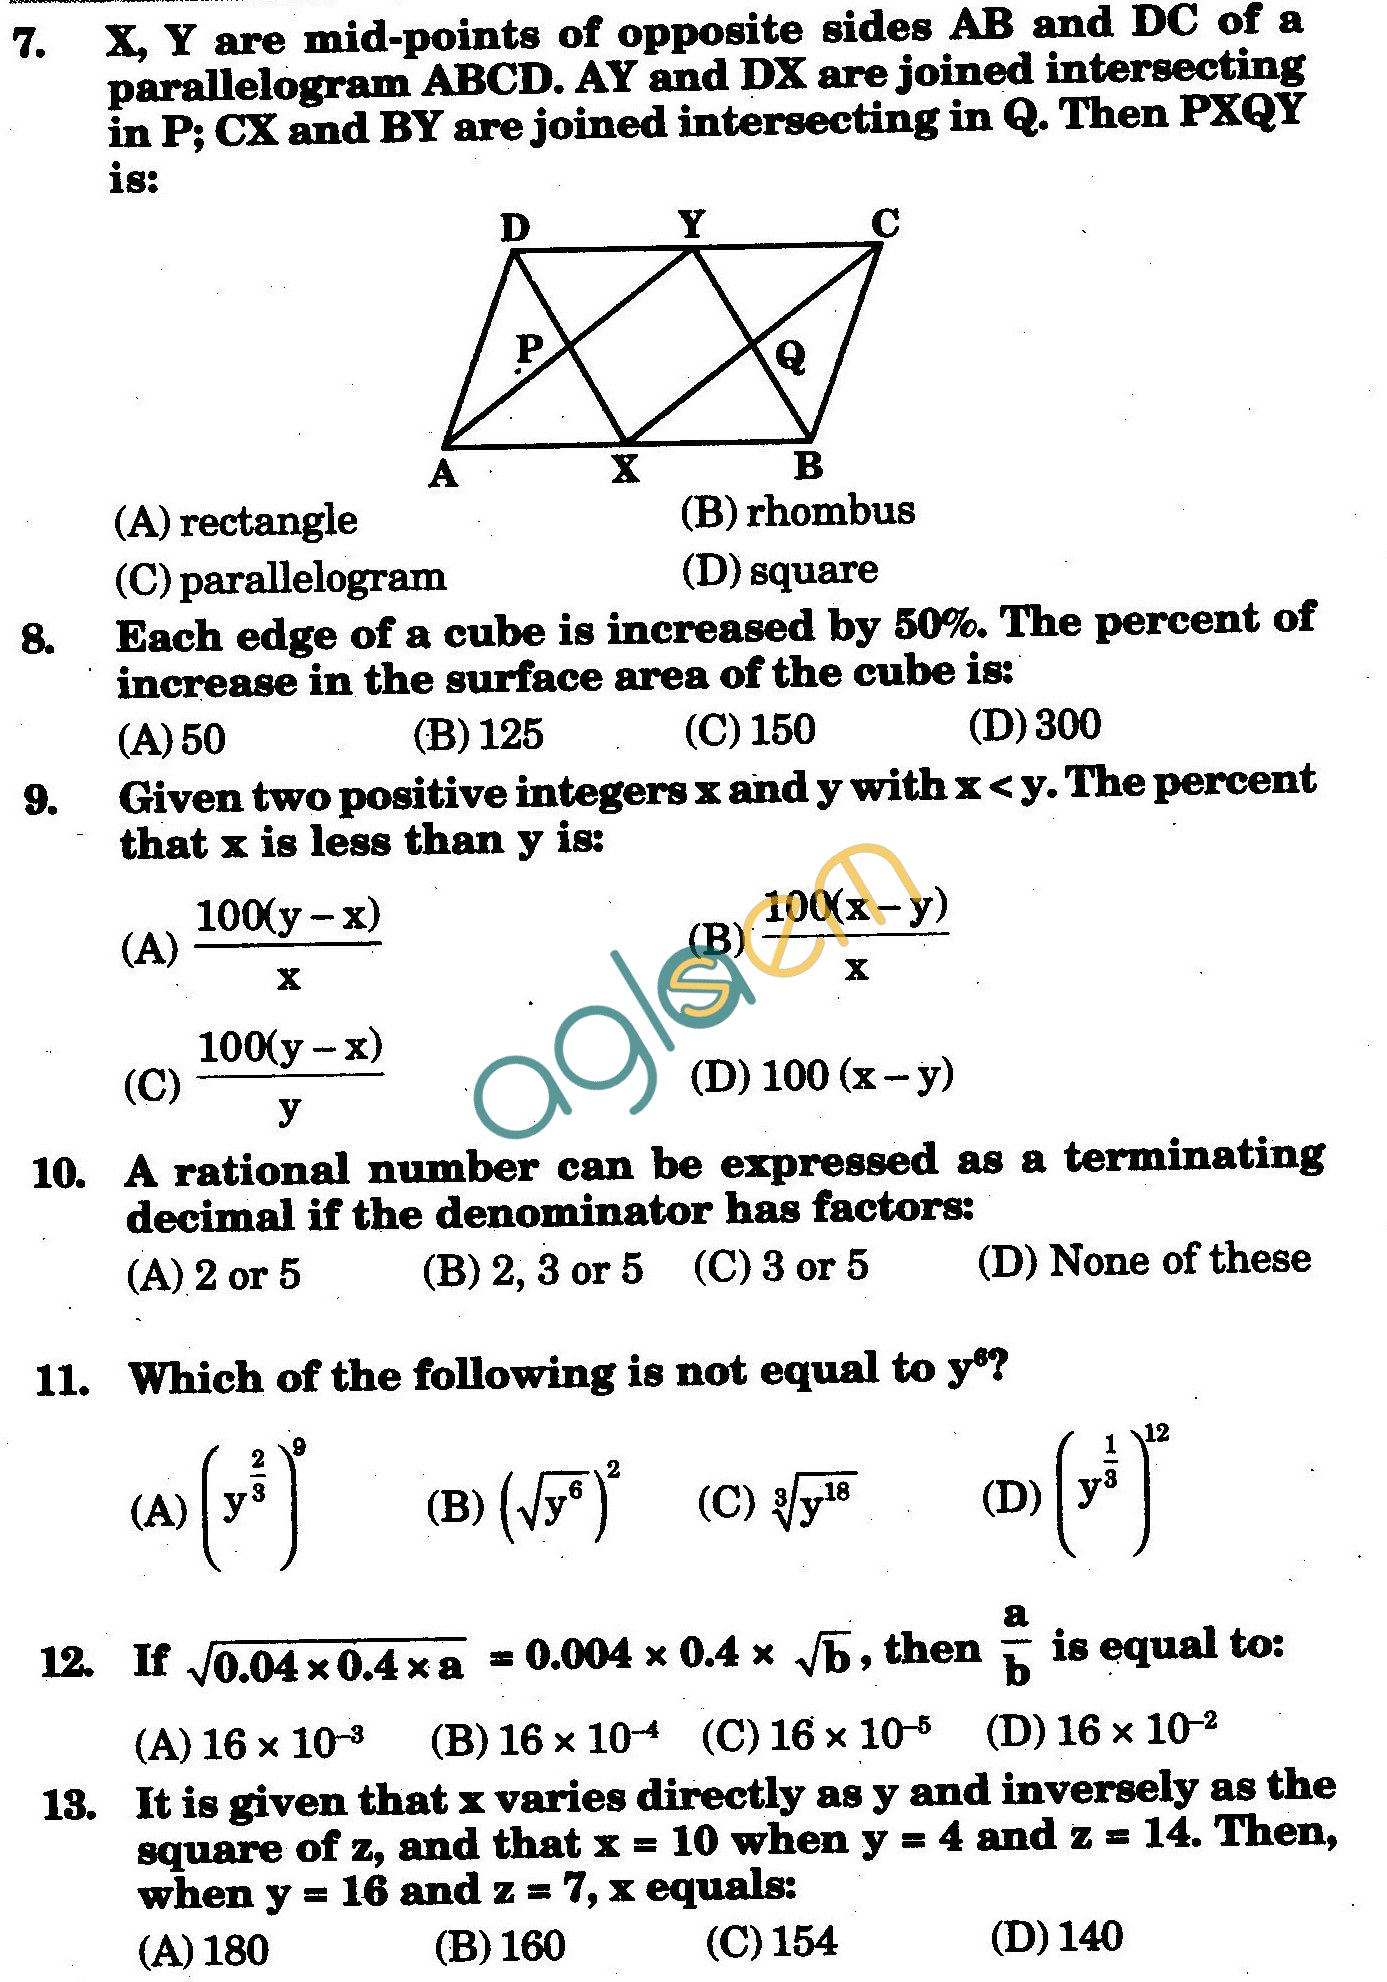 NSTSE 2010: Class VIII Question Paper with Answers - Mathematics